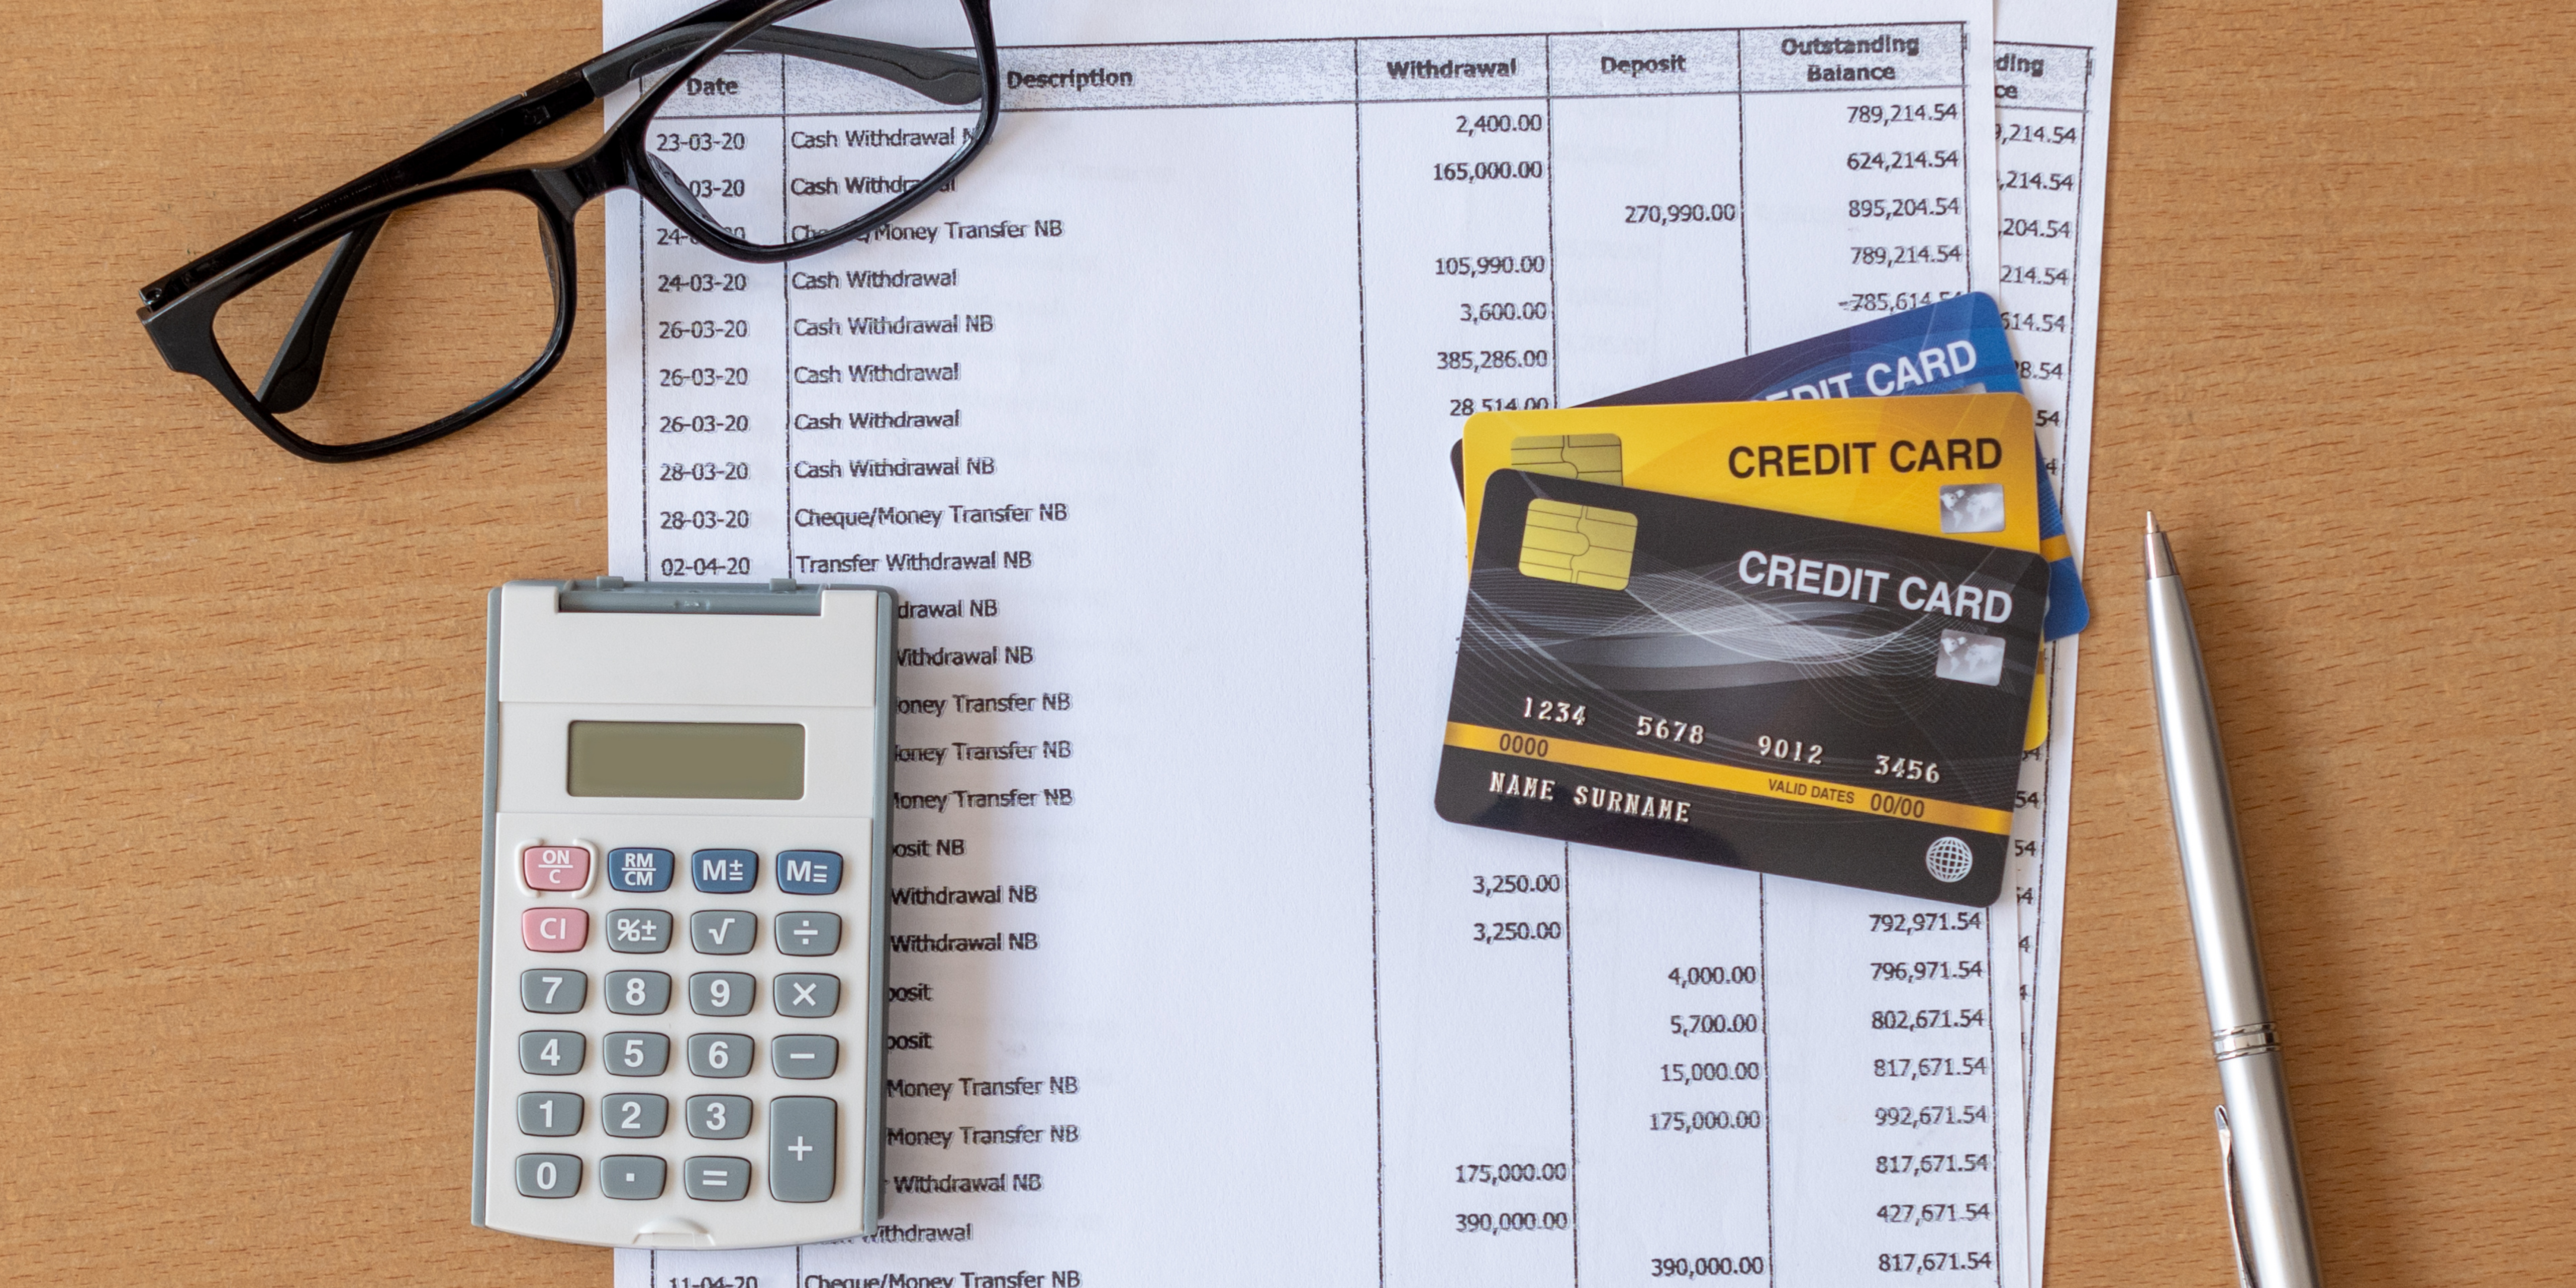 How to Read and Understand Credit Card Statements